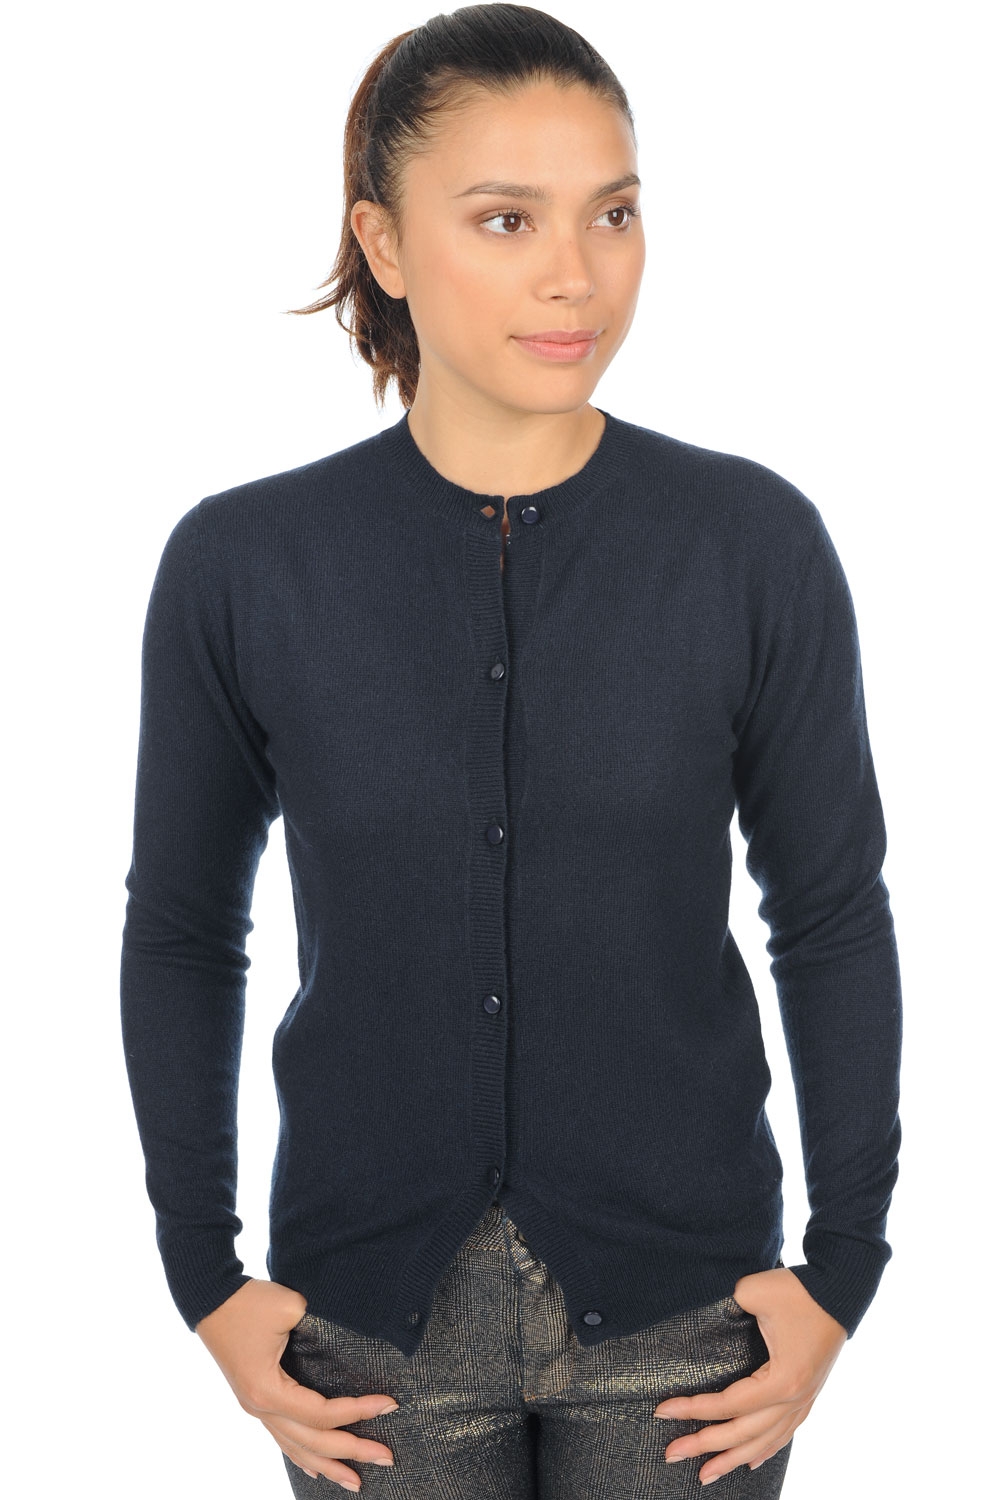 Cashmere ladies basic sweaters at low prices tyra first dress blue xl